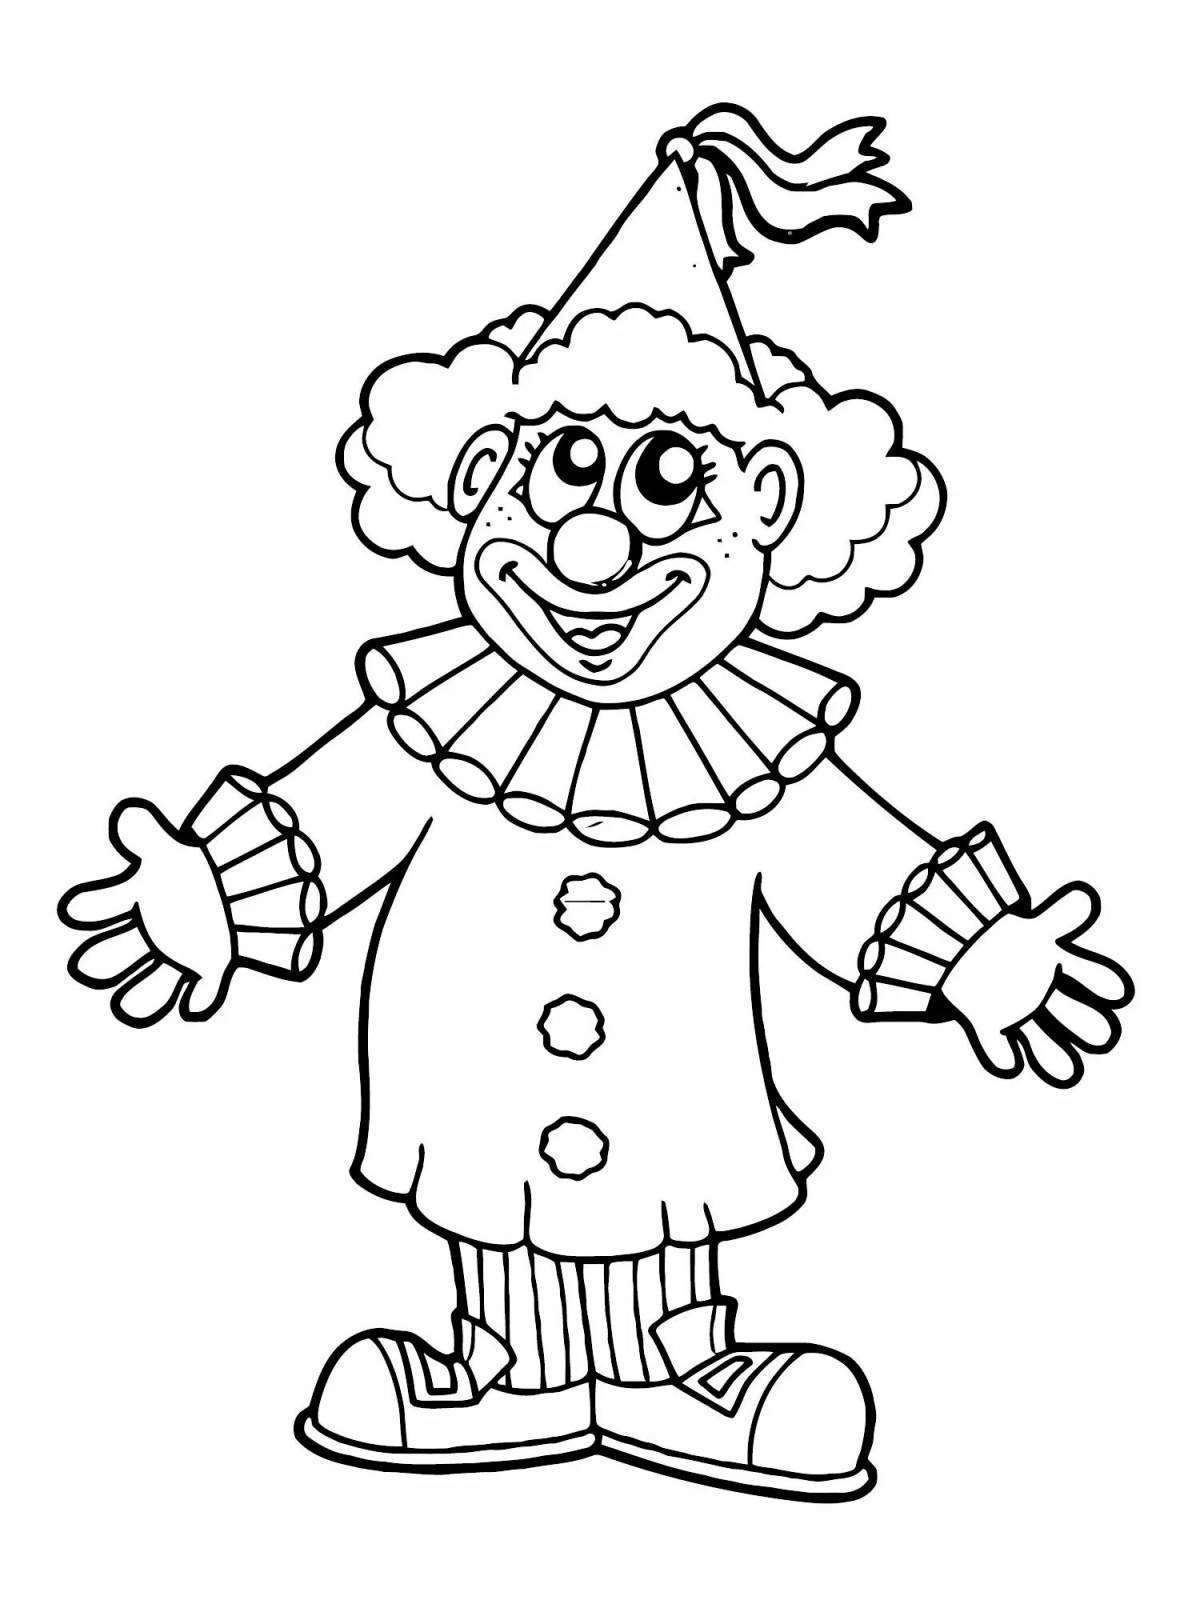 Colouring funny clown